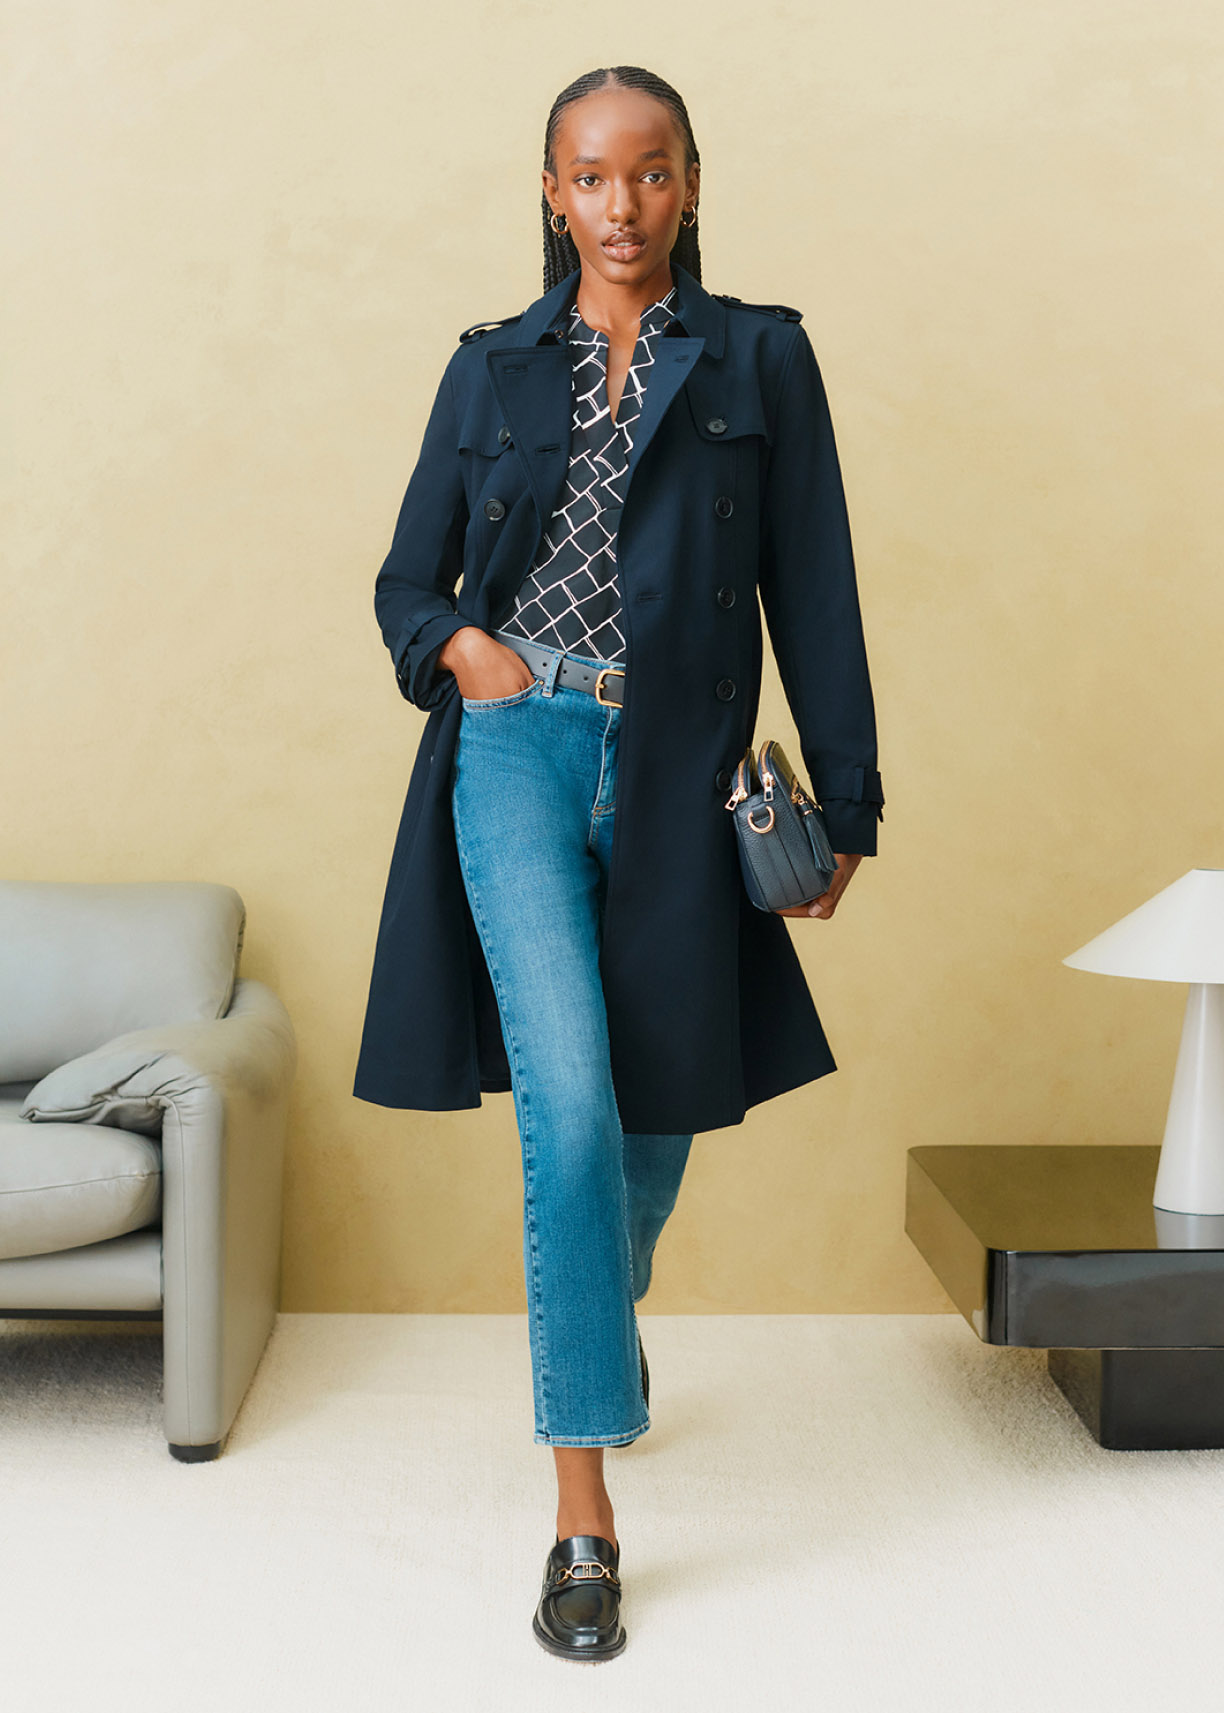 Back to Work: Fall 2021 Fashion Women's Suiting - Taste and Tipple